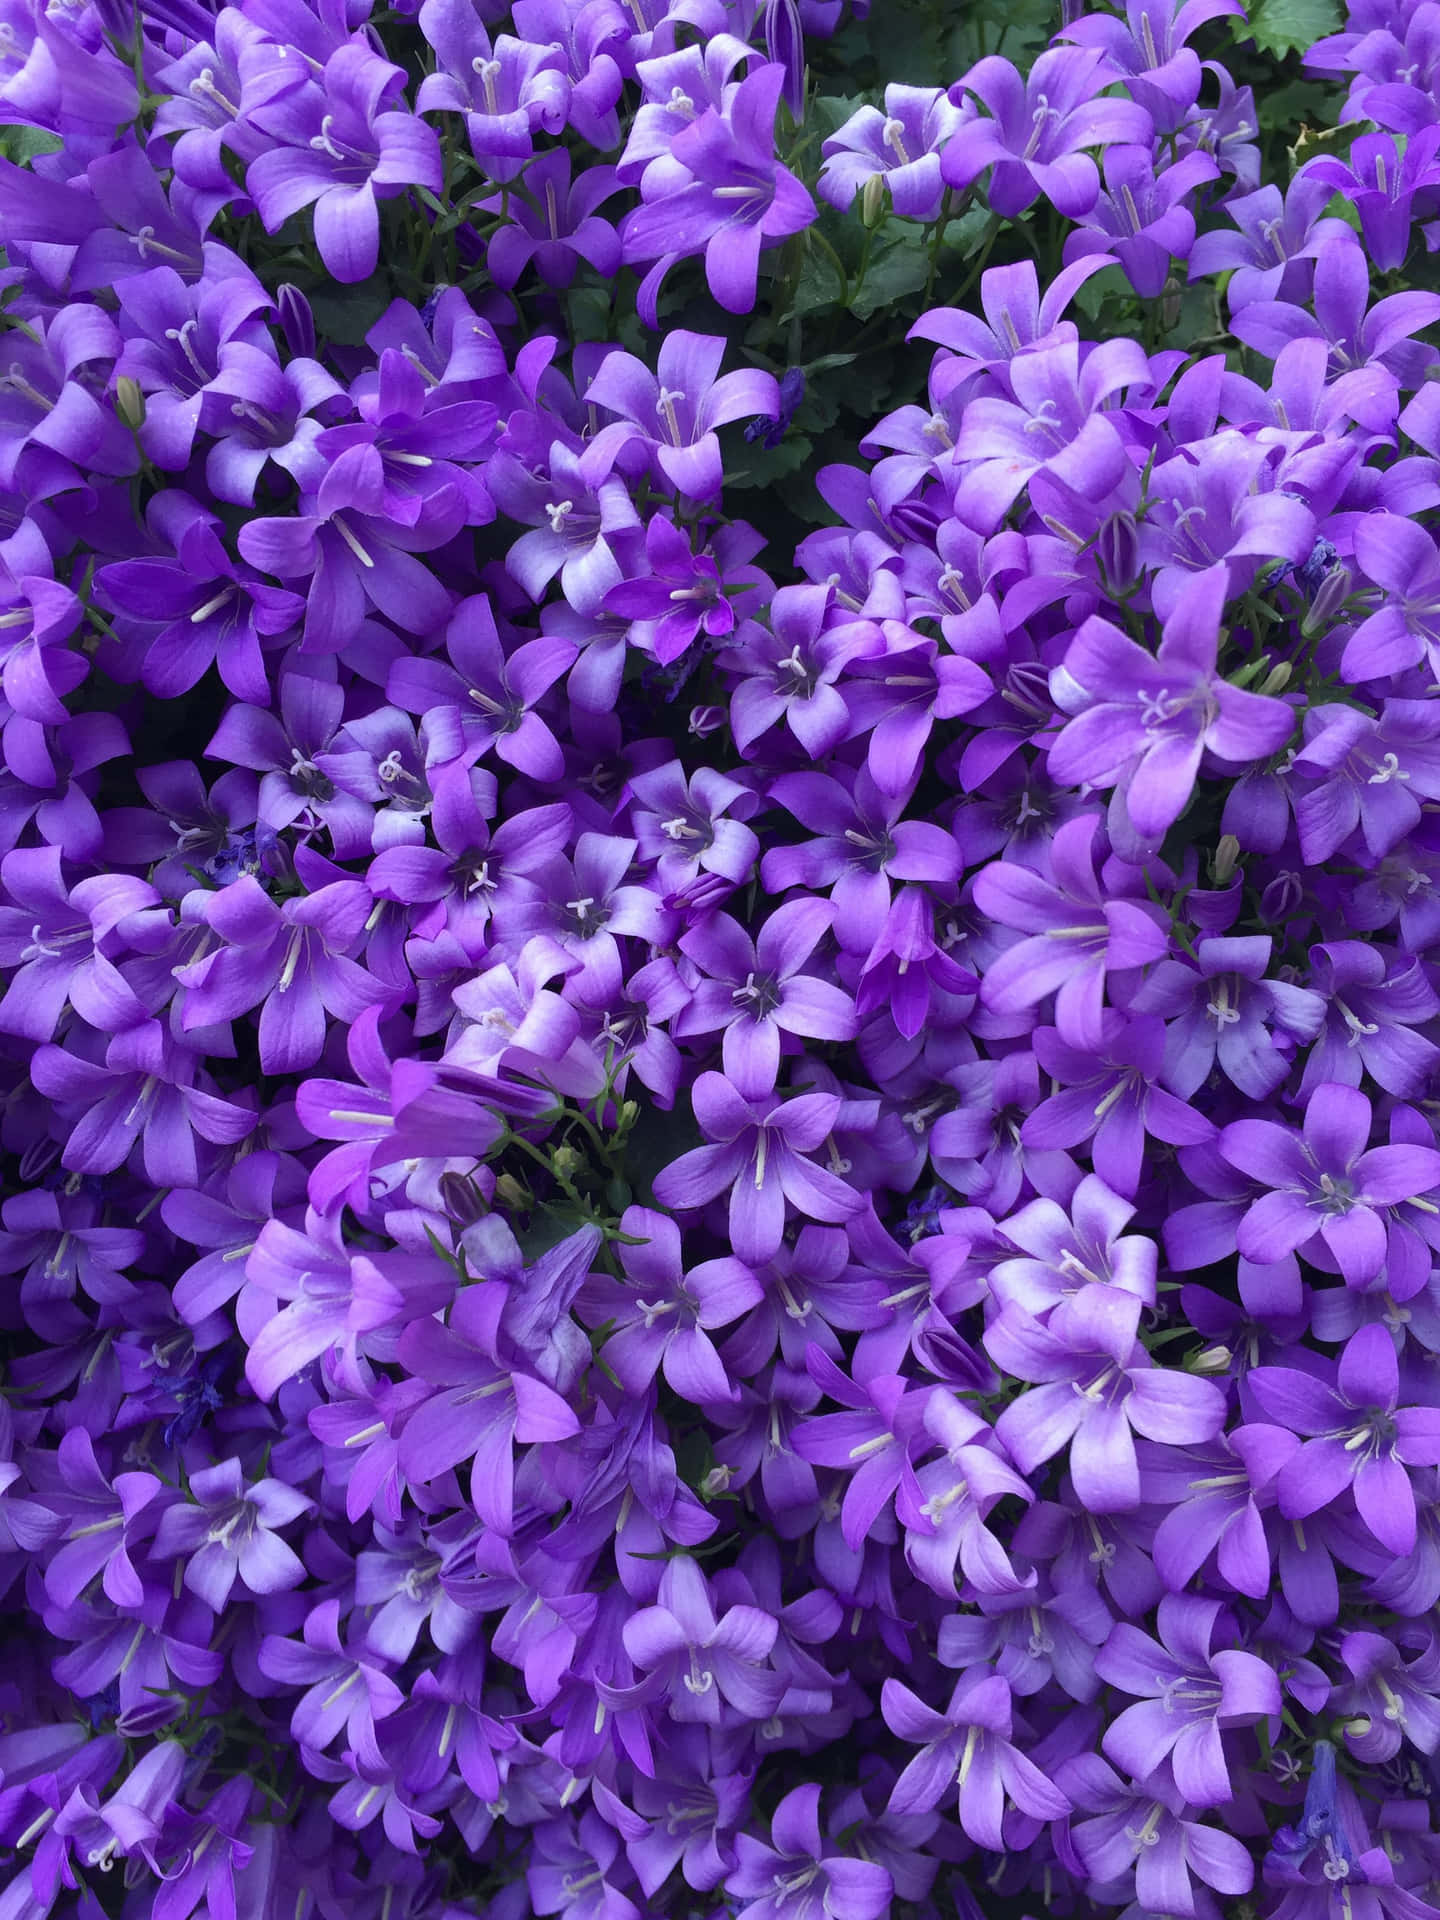 The beauty of springtime with a breathtaking purple flower